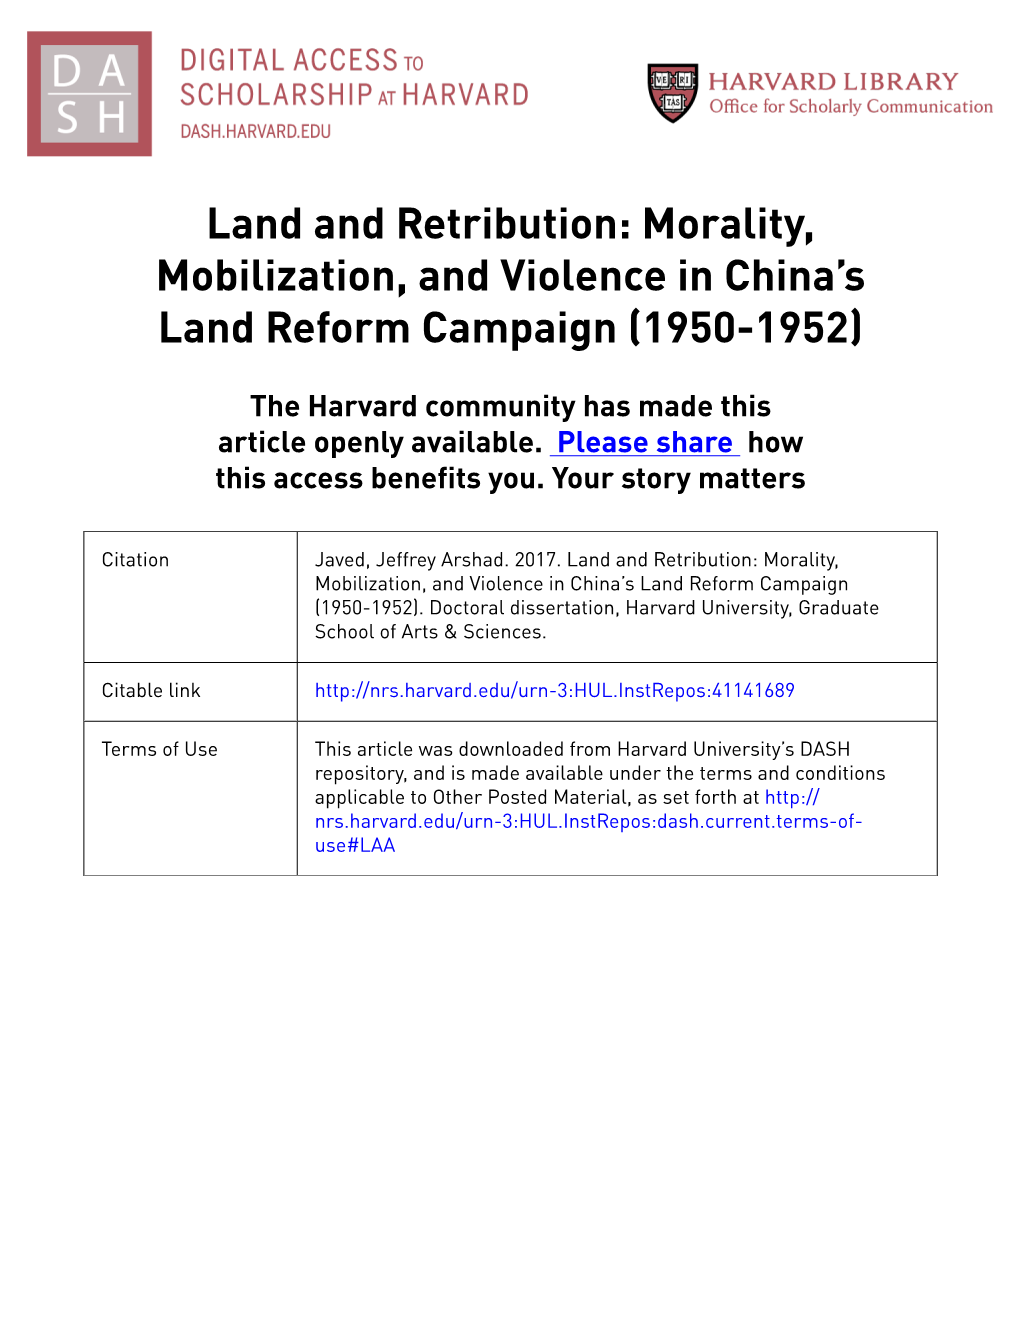 Morality, Mobilization, and Violence in China's Land Reform Campaign